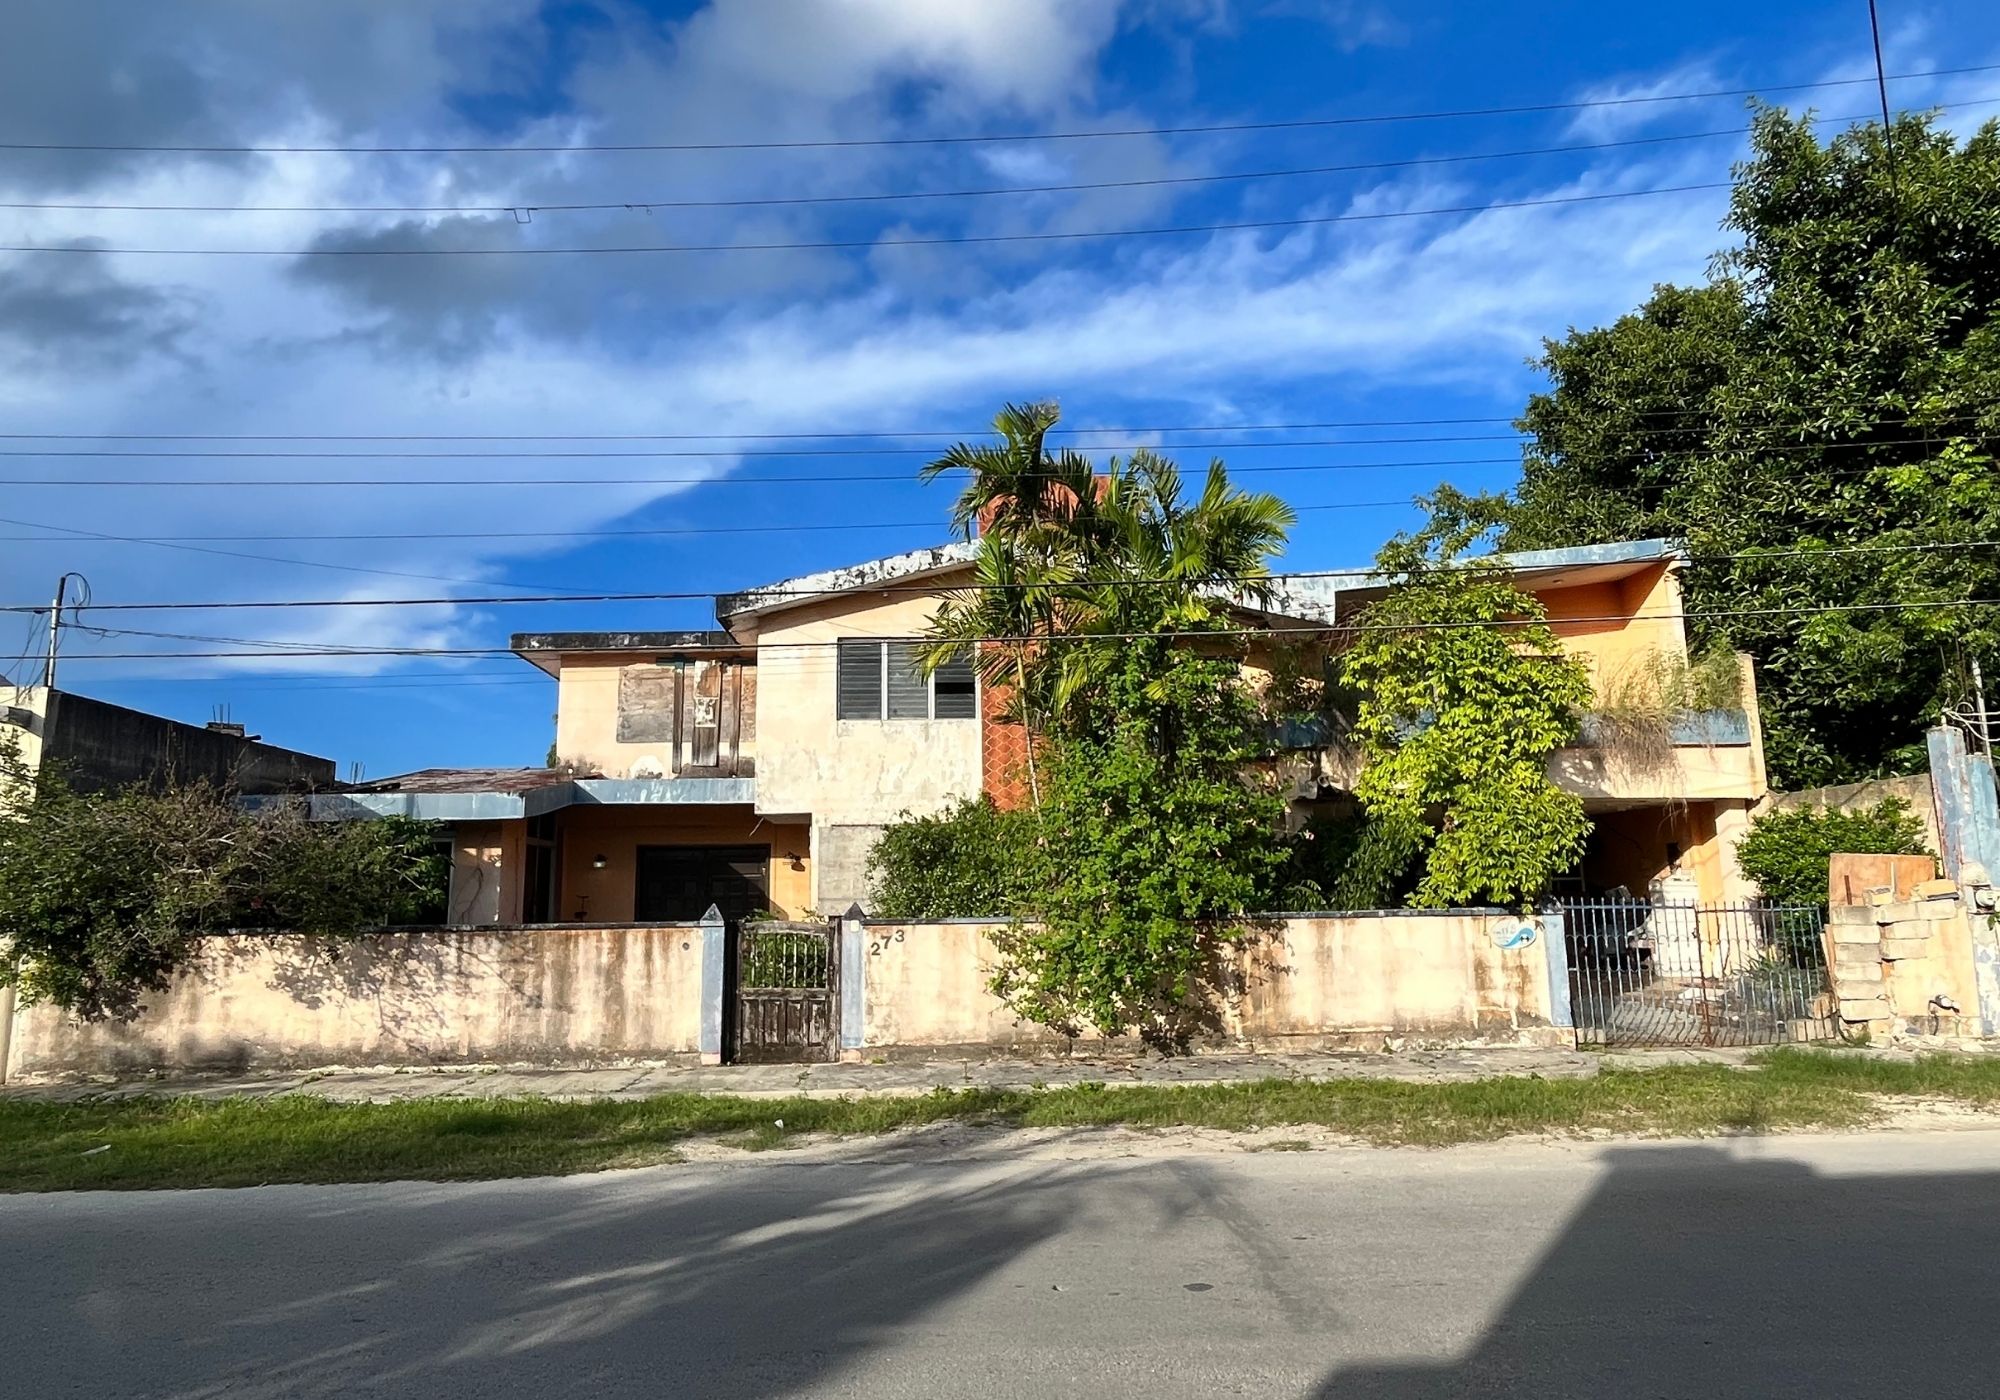 Lot for sale 5 minute drive to the beach, 10 de Abril, in Cozumel Island.